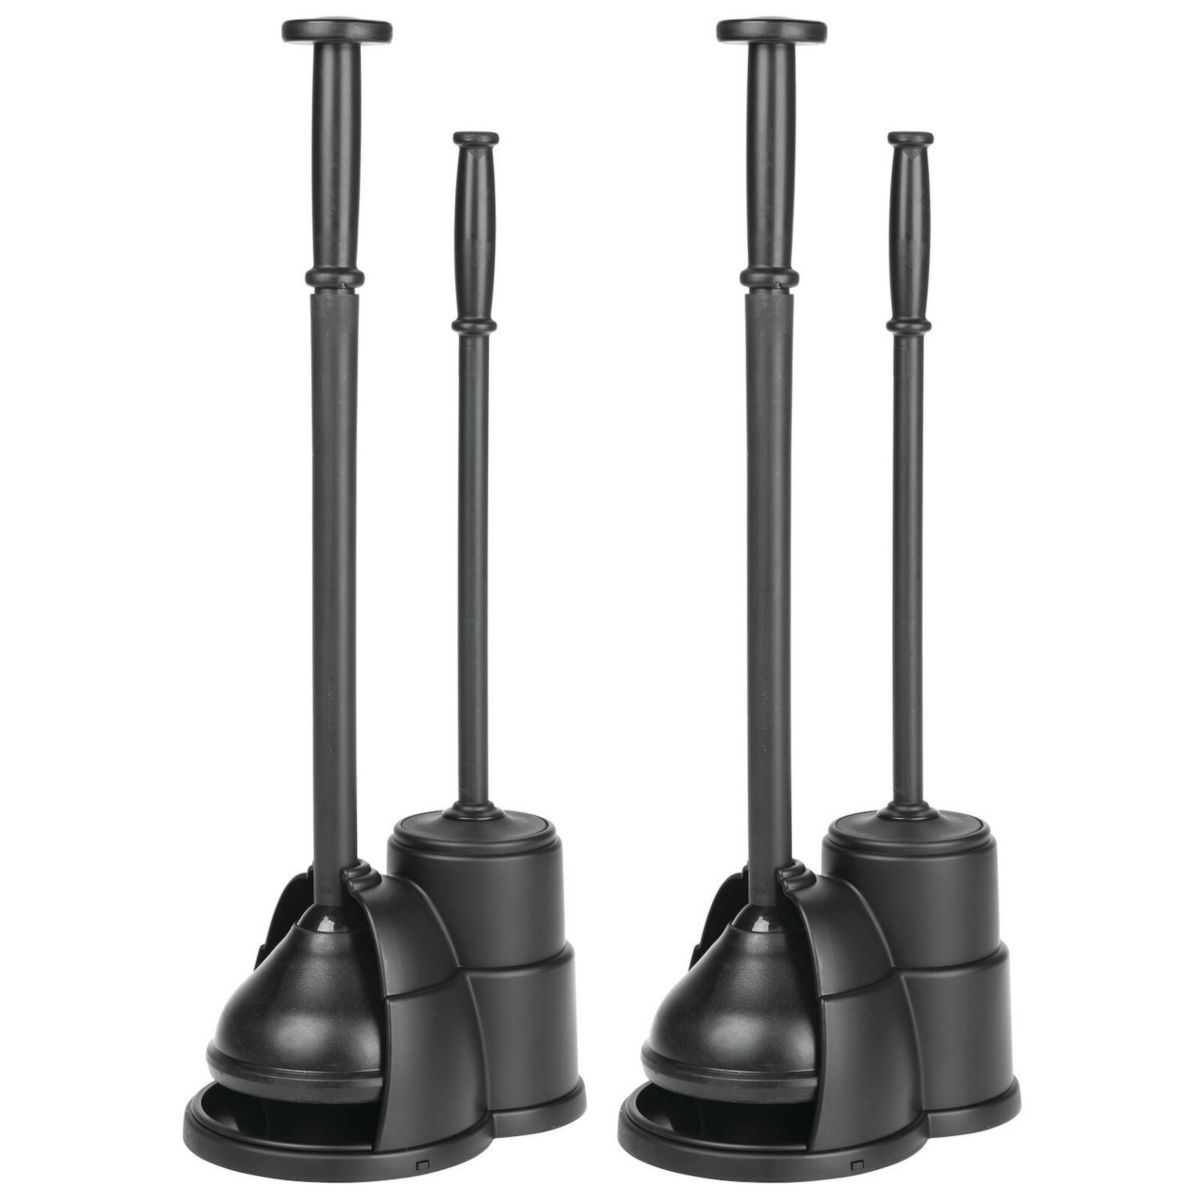 mDesign Compact Plastic Toilet Bowl Brush and Plunger Combo Set, 2 Pack MDesign